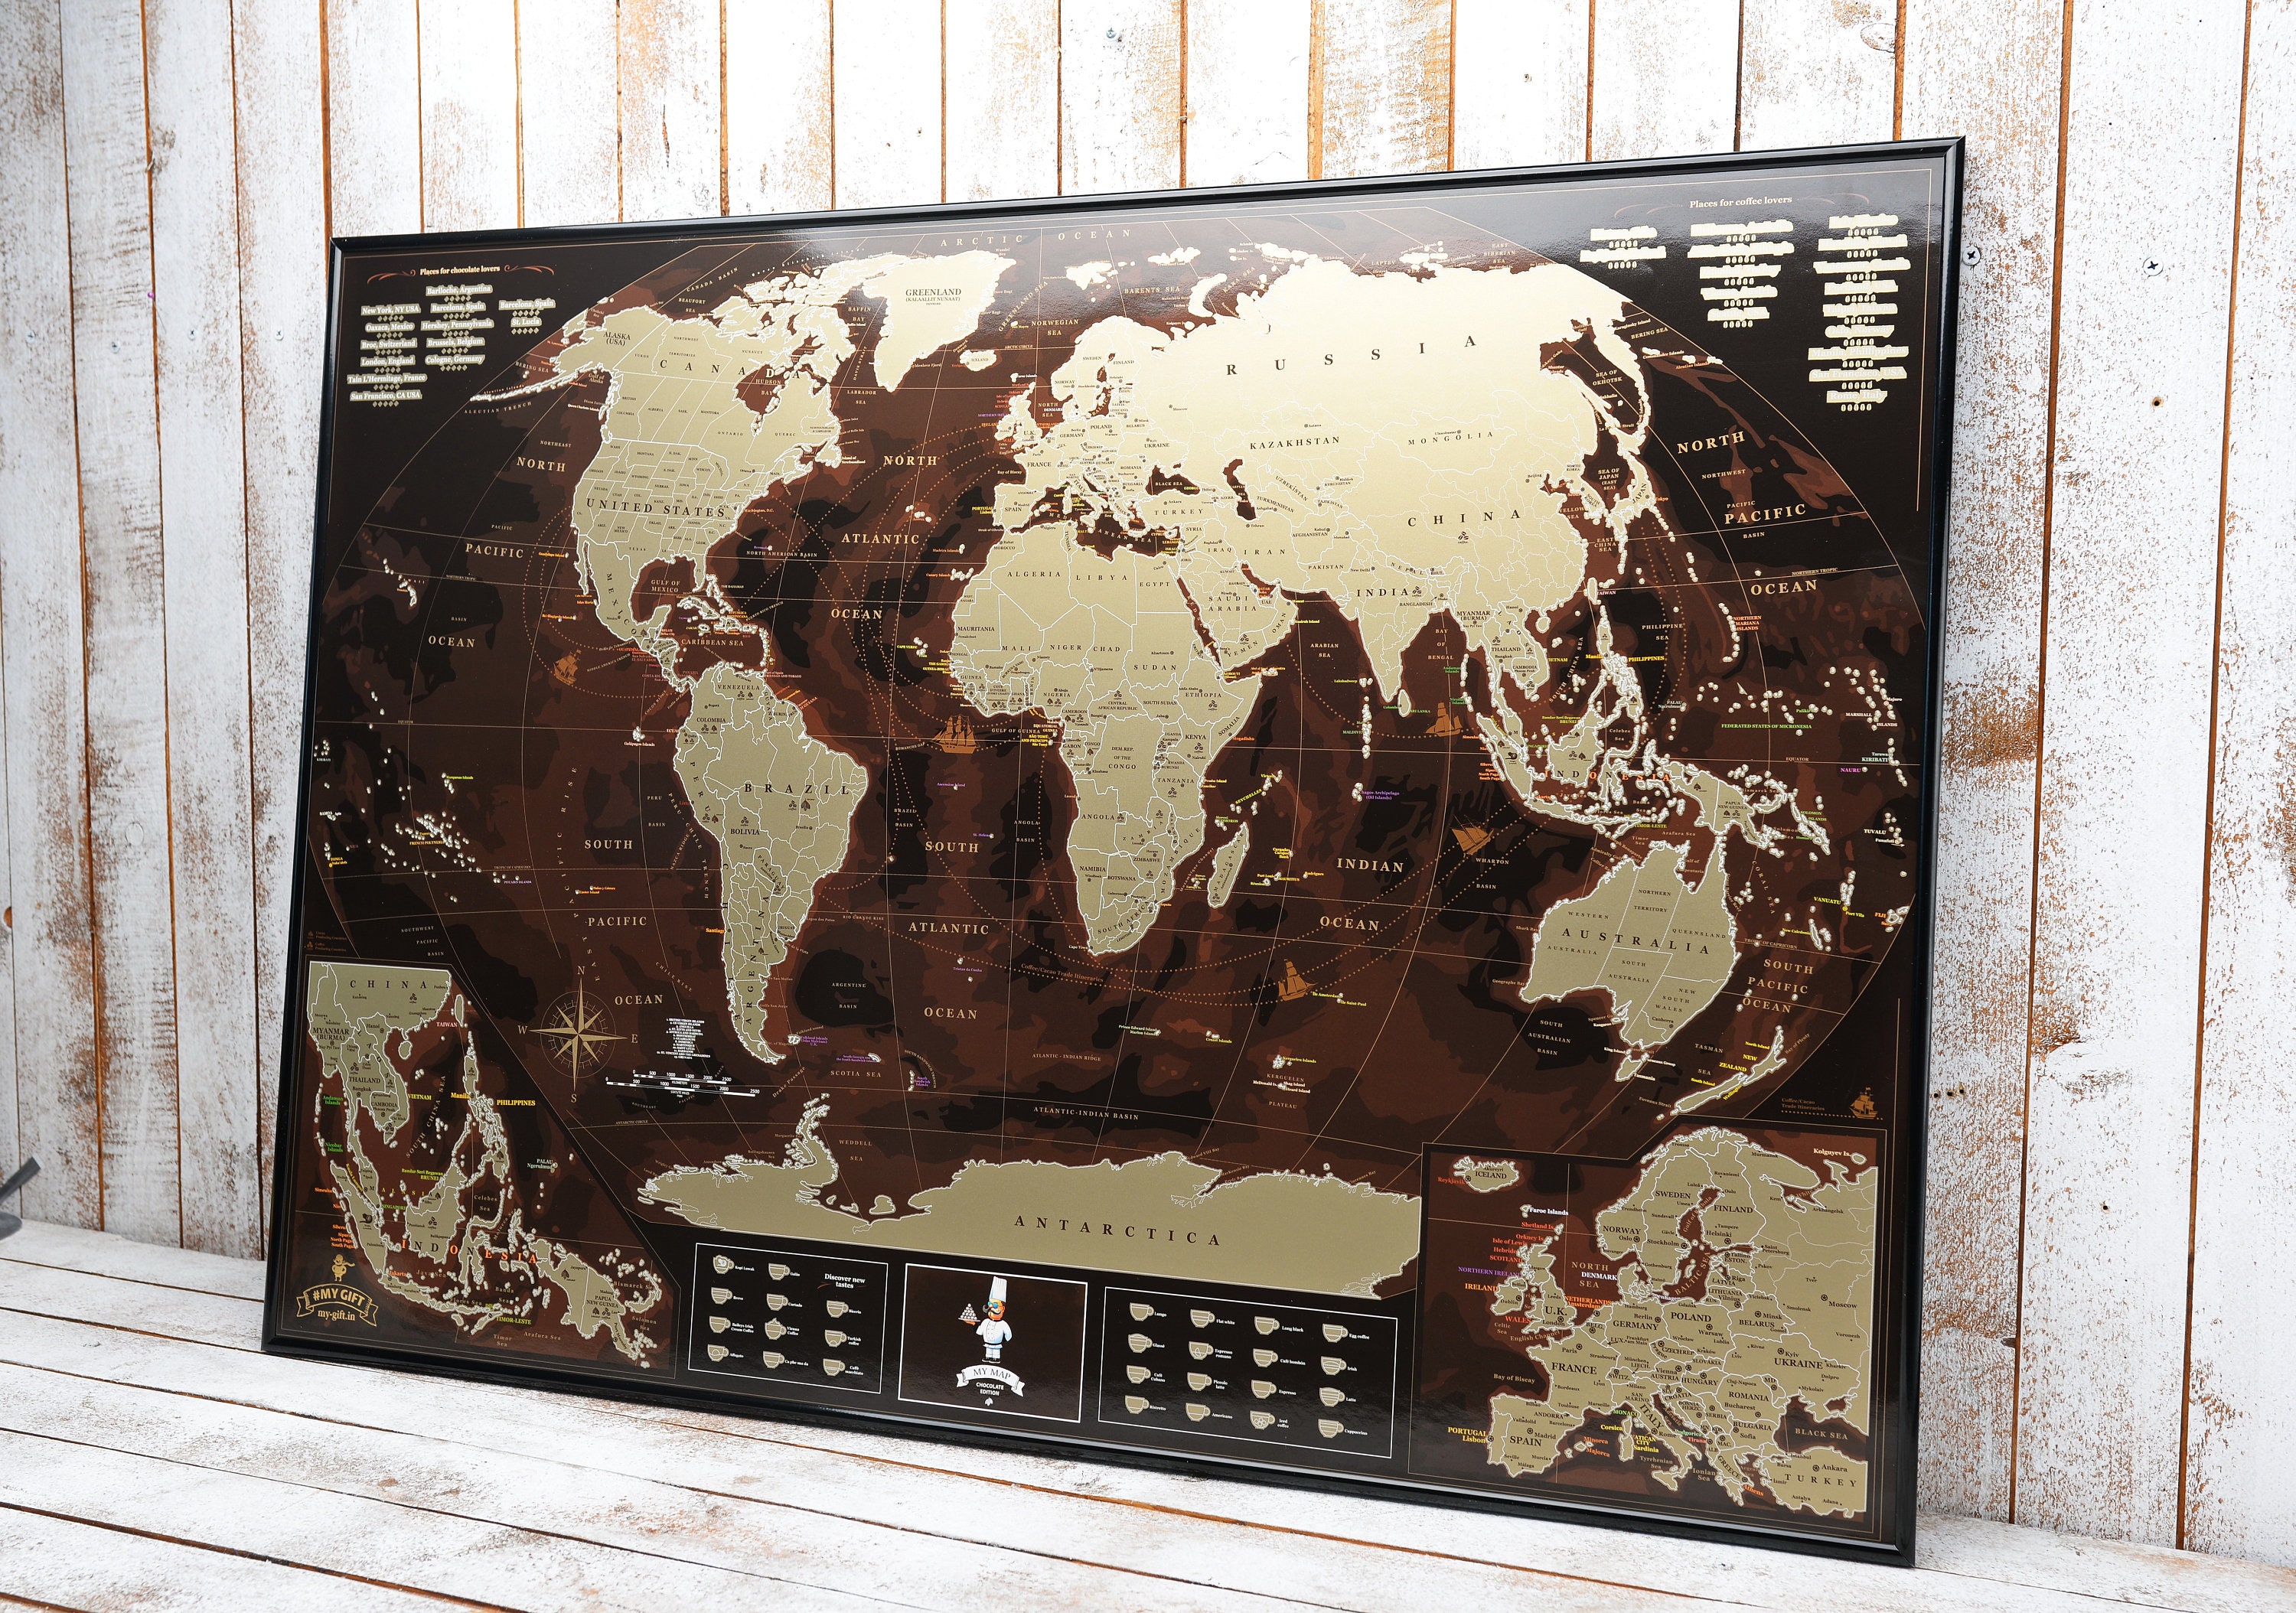 Scratch Off map 16x24 Black Gold Detailed USA States Deluxe Tracker Pin  World Map MyMap Travel map Wall Poster Push pin map Includes Pins Tube  Poster